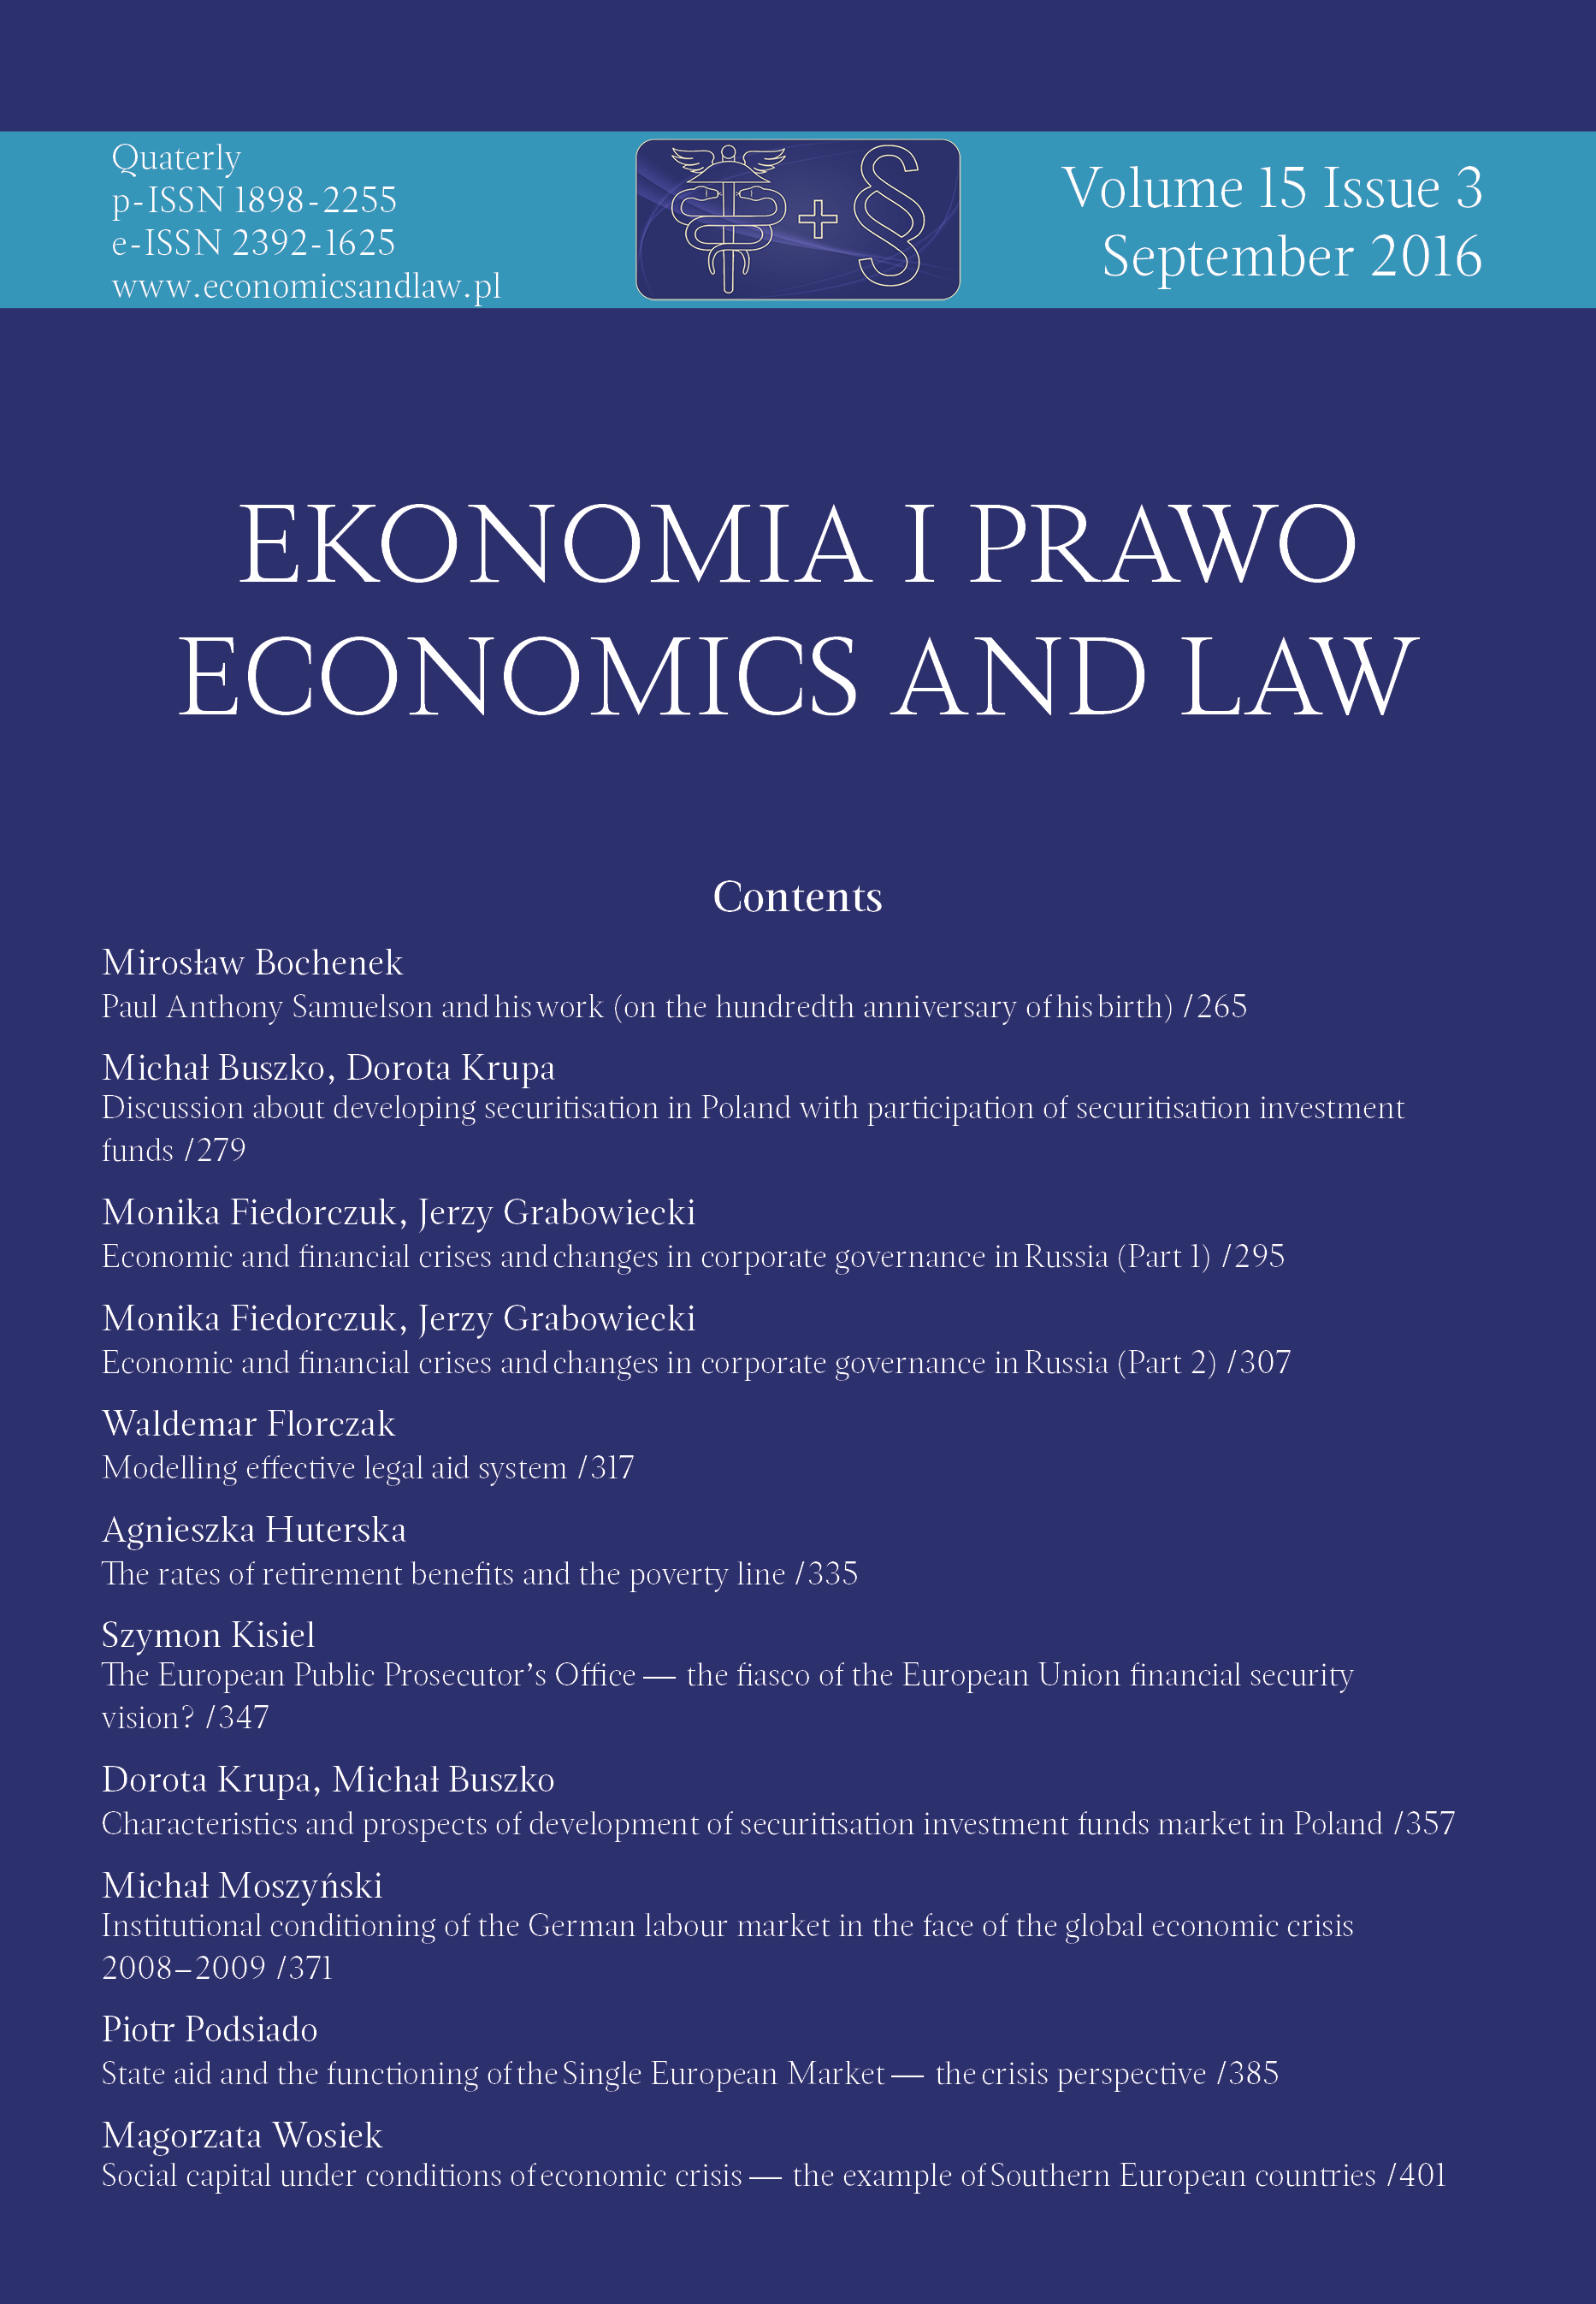 Economic and financial crises and changes in corporate governance in Russia (Part 1) Cover Image